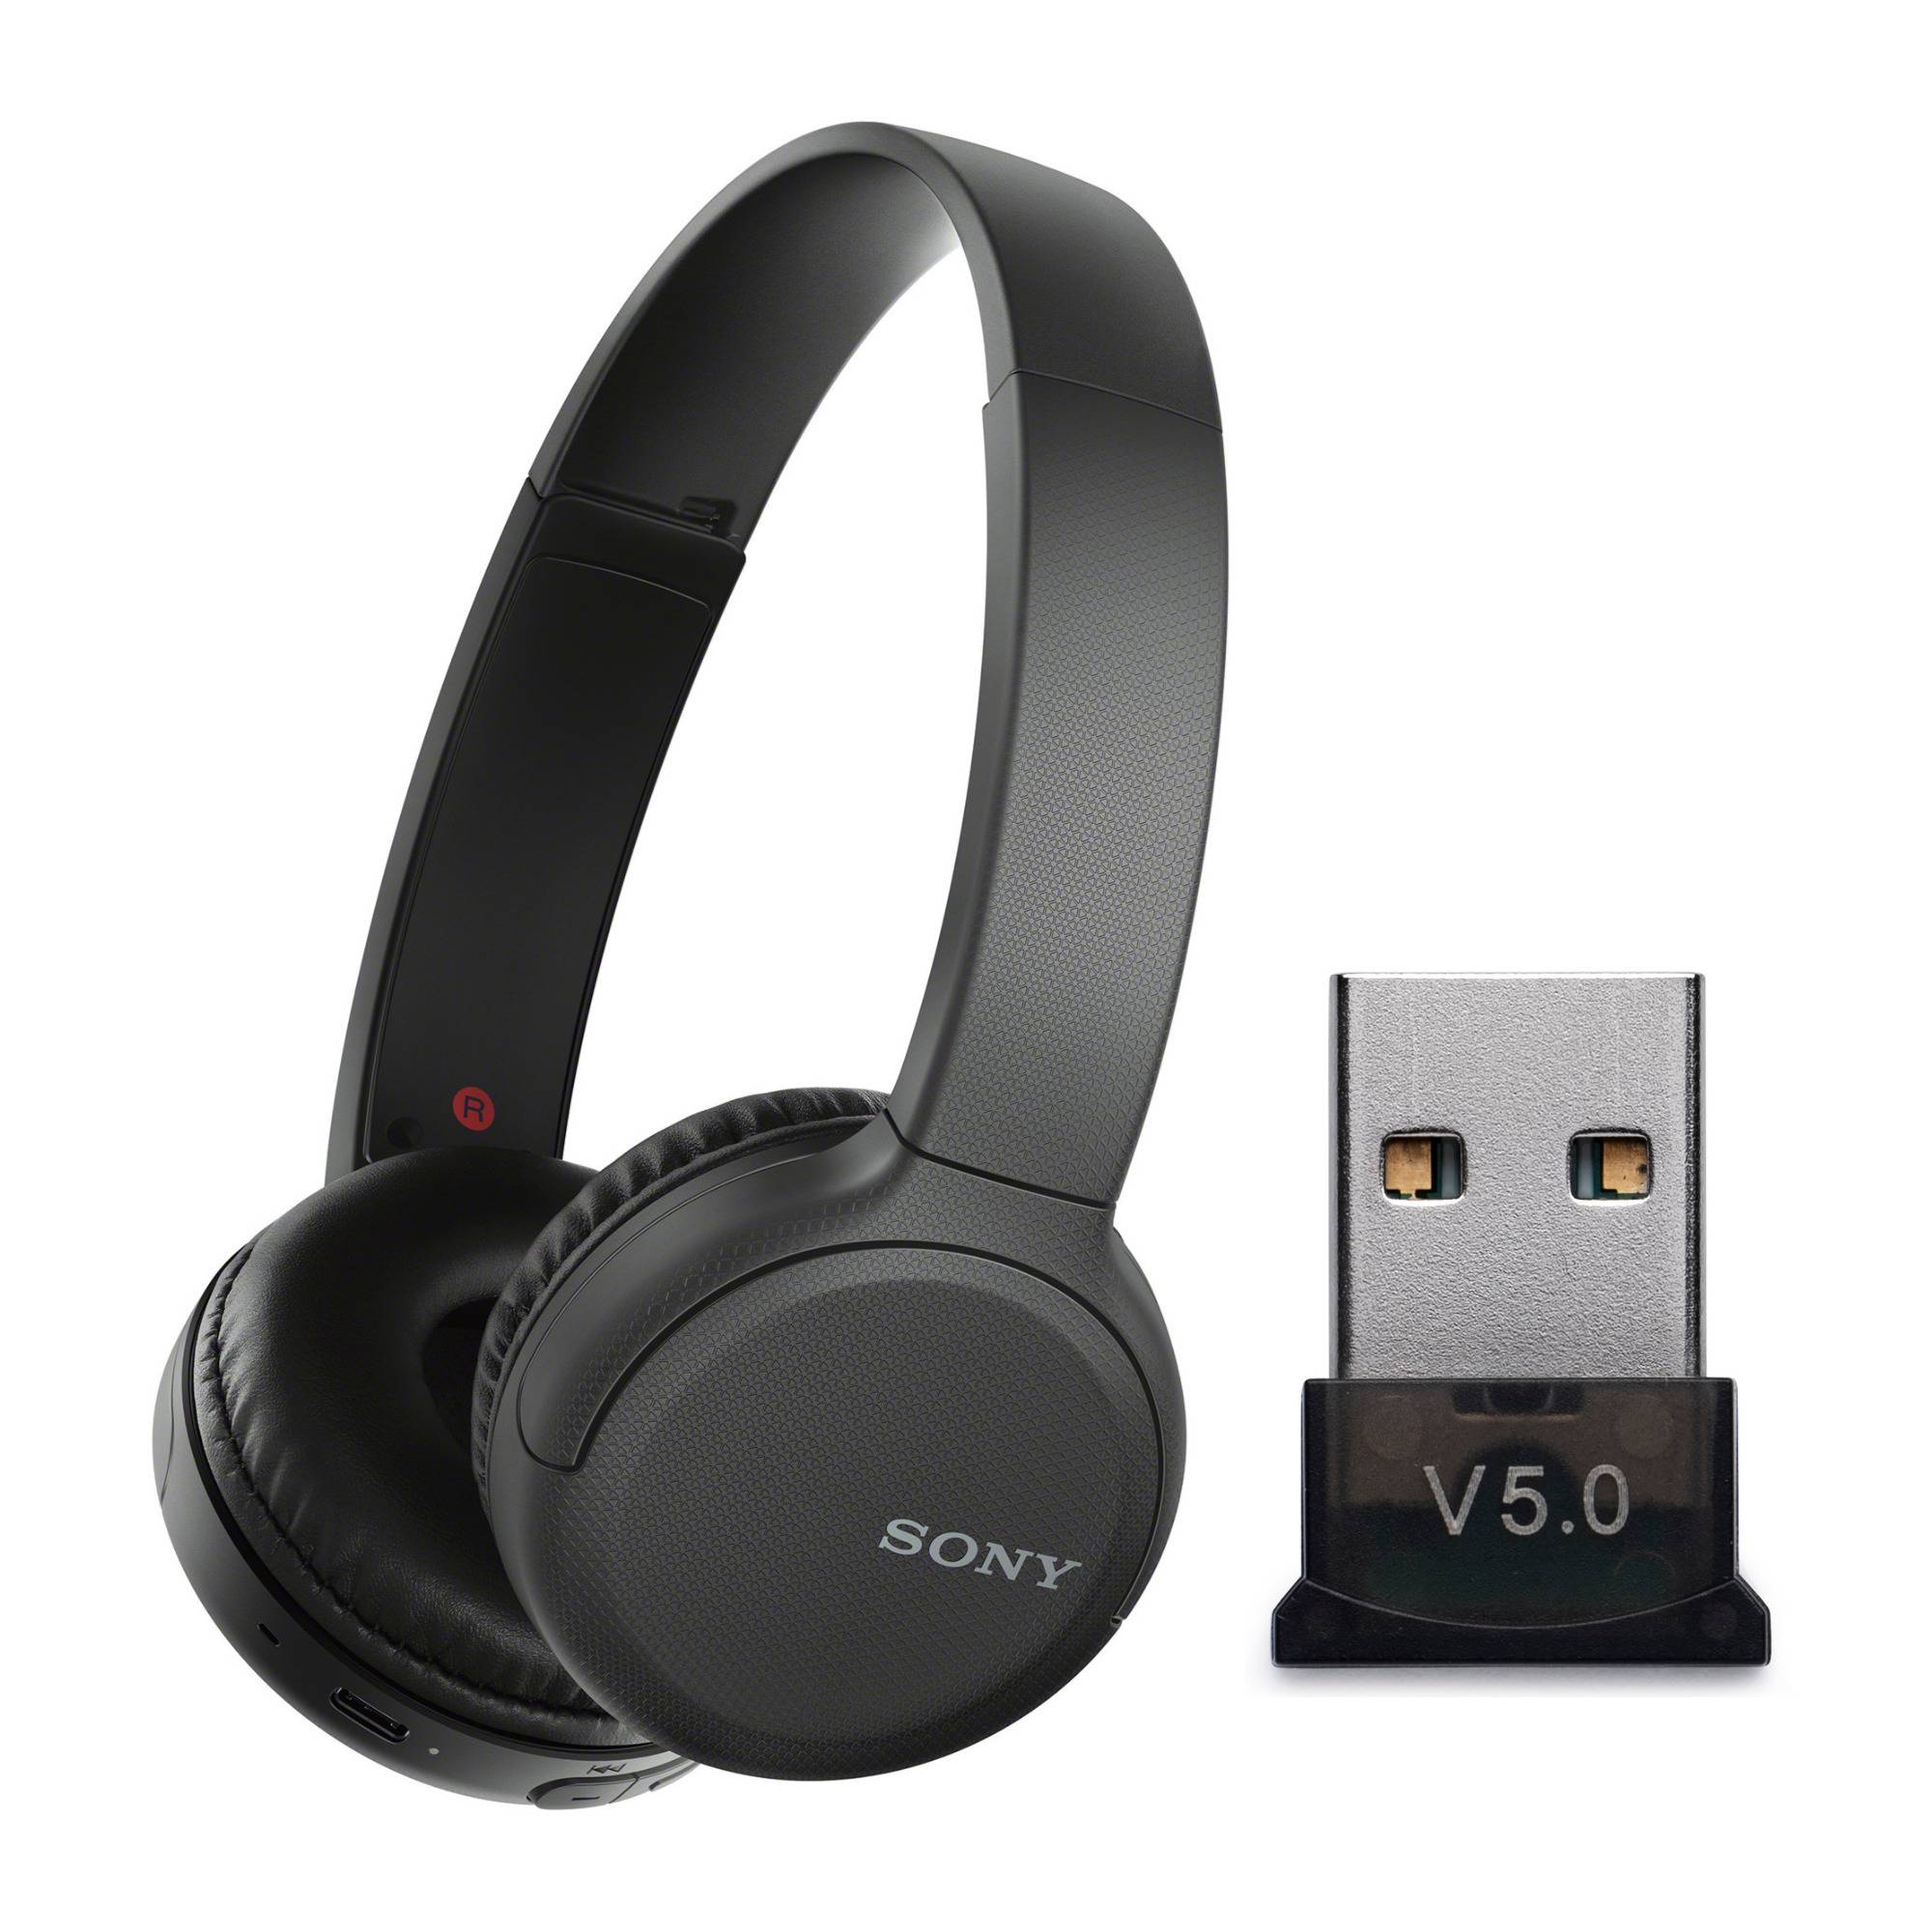 Sony WH-CH510 Stamina Wireless On-Ear Headphones (Black) with USB Bluetooth Dongle Adapter